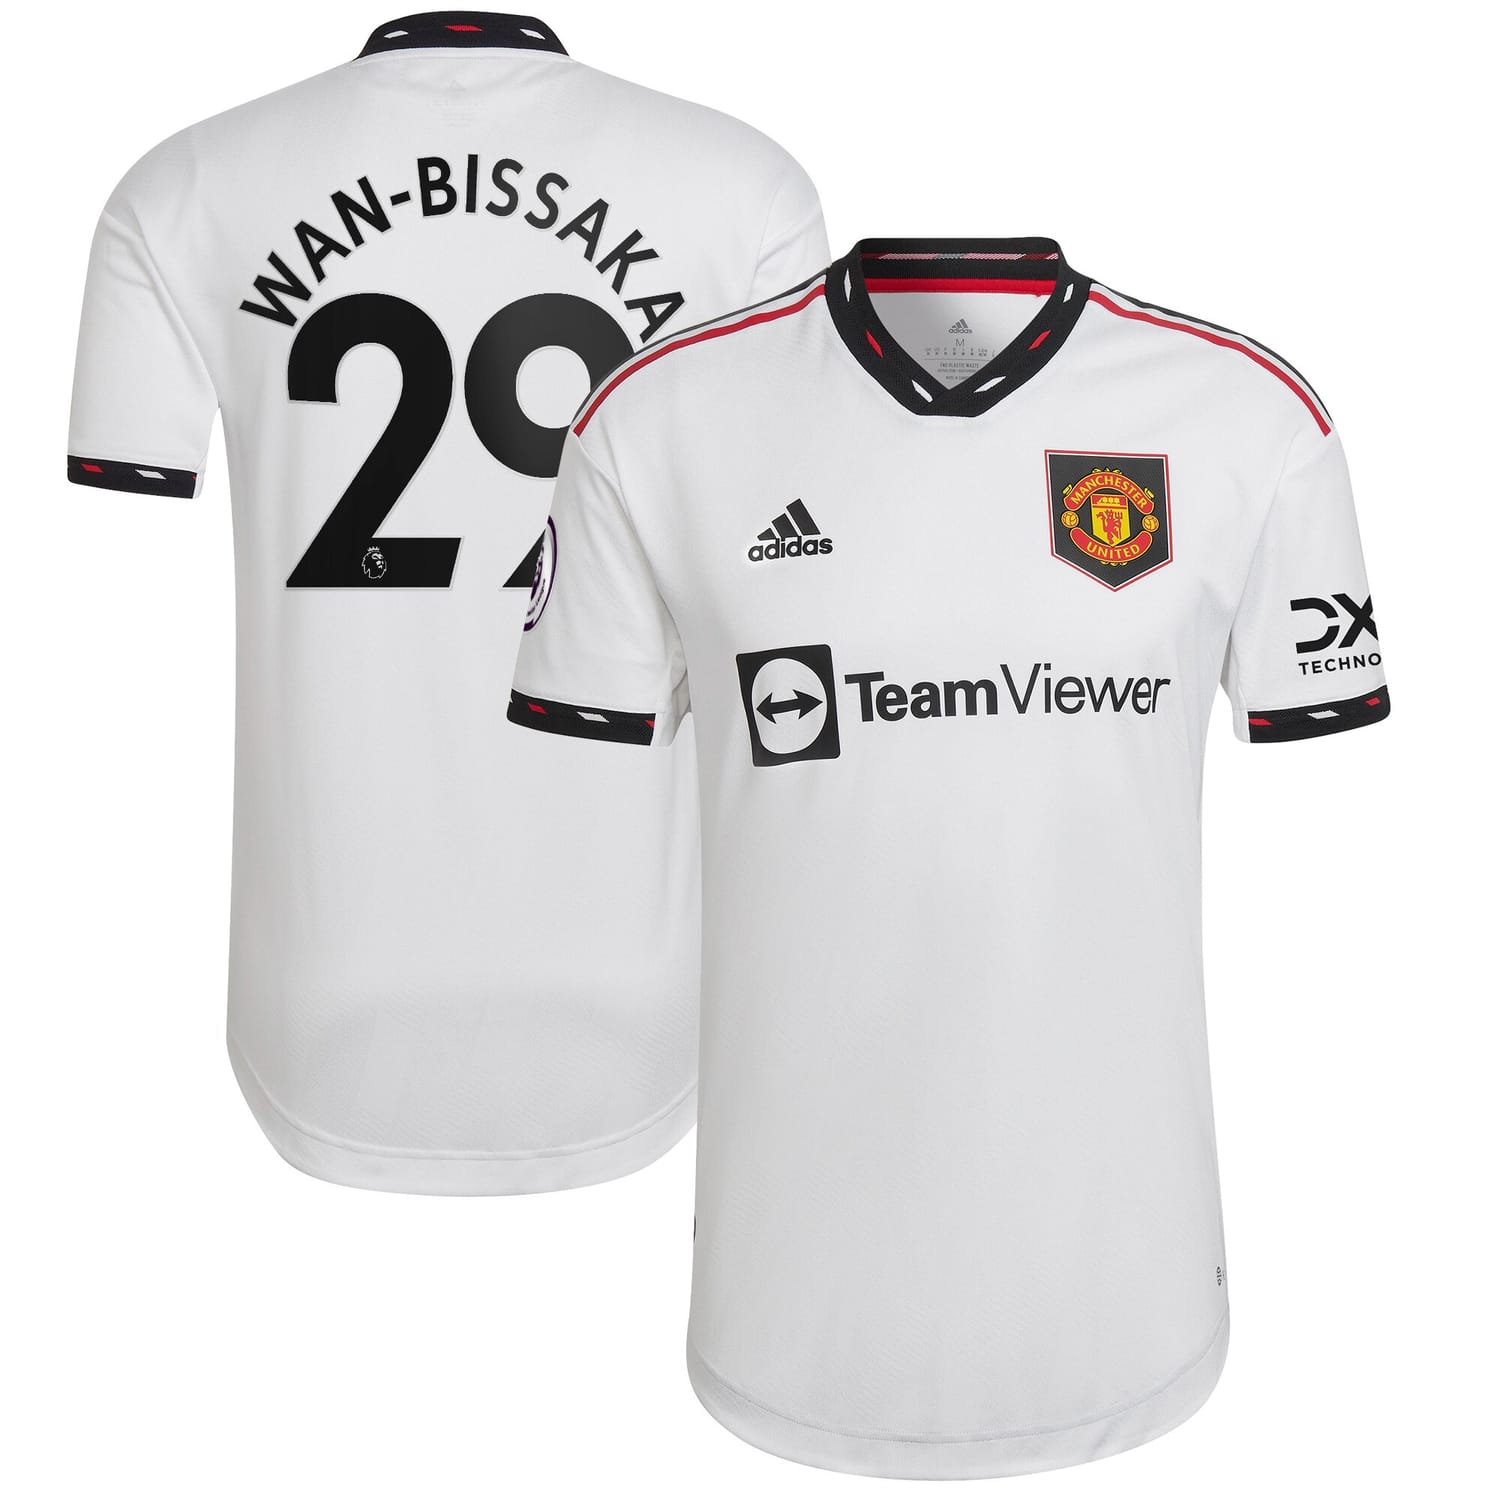 Premier League Manchester United Away Authentic Jersey Shirt White 2022-23 player Aaron Wan-Bissaka printing for Men